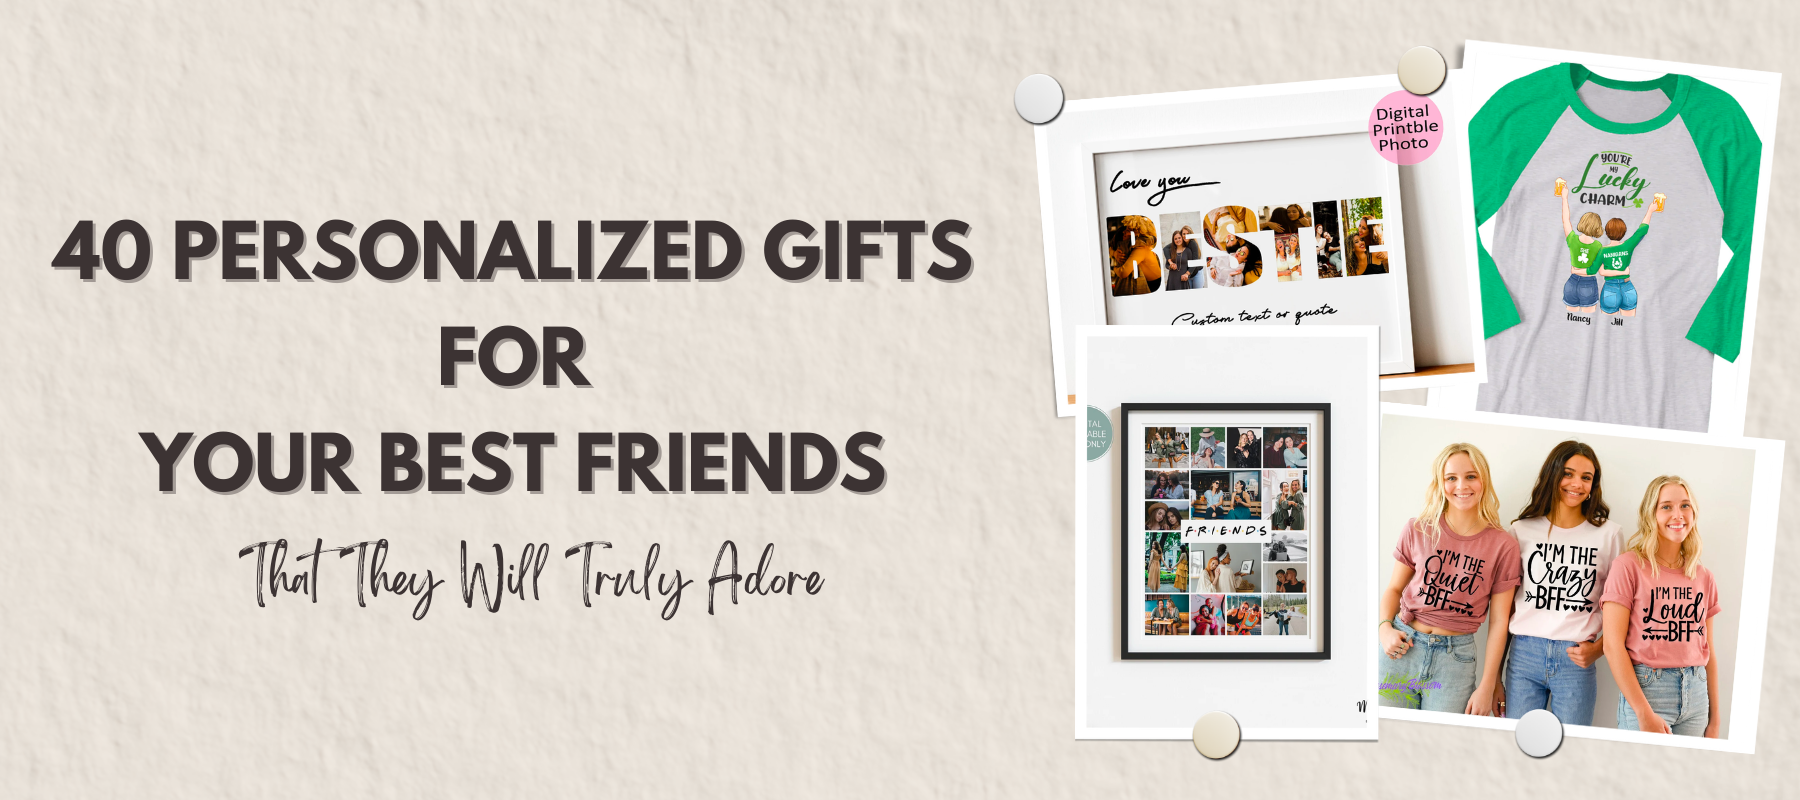 40 Personalized Gifts for Your Best Friends That They Will Truly Adore